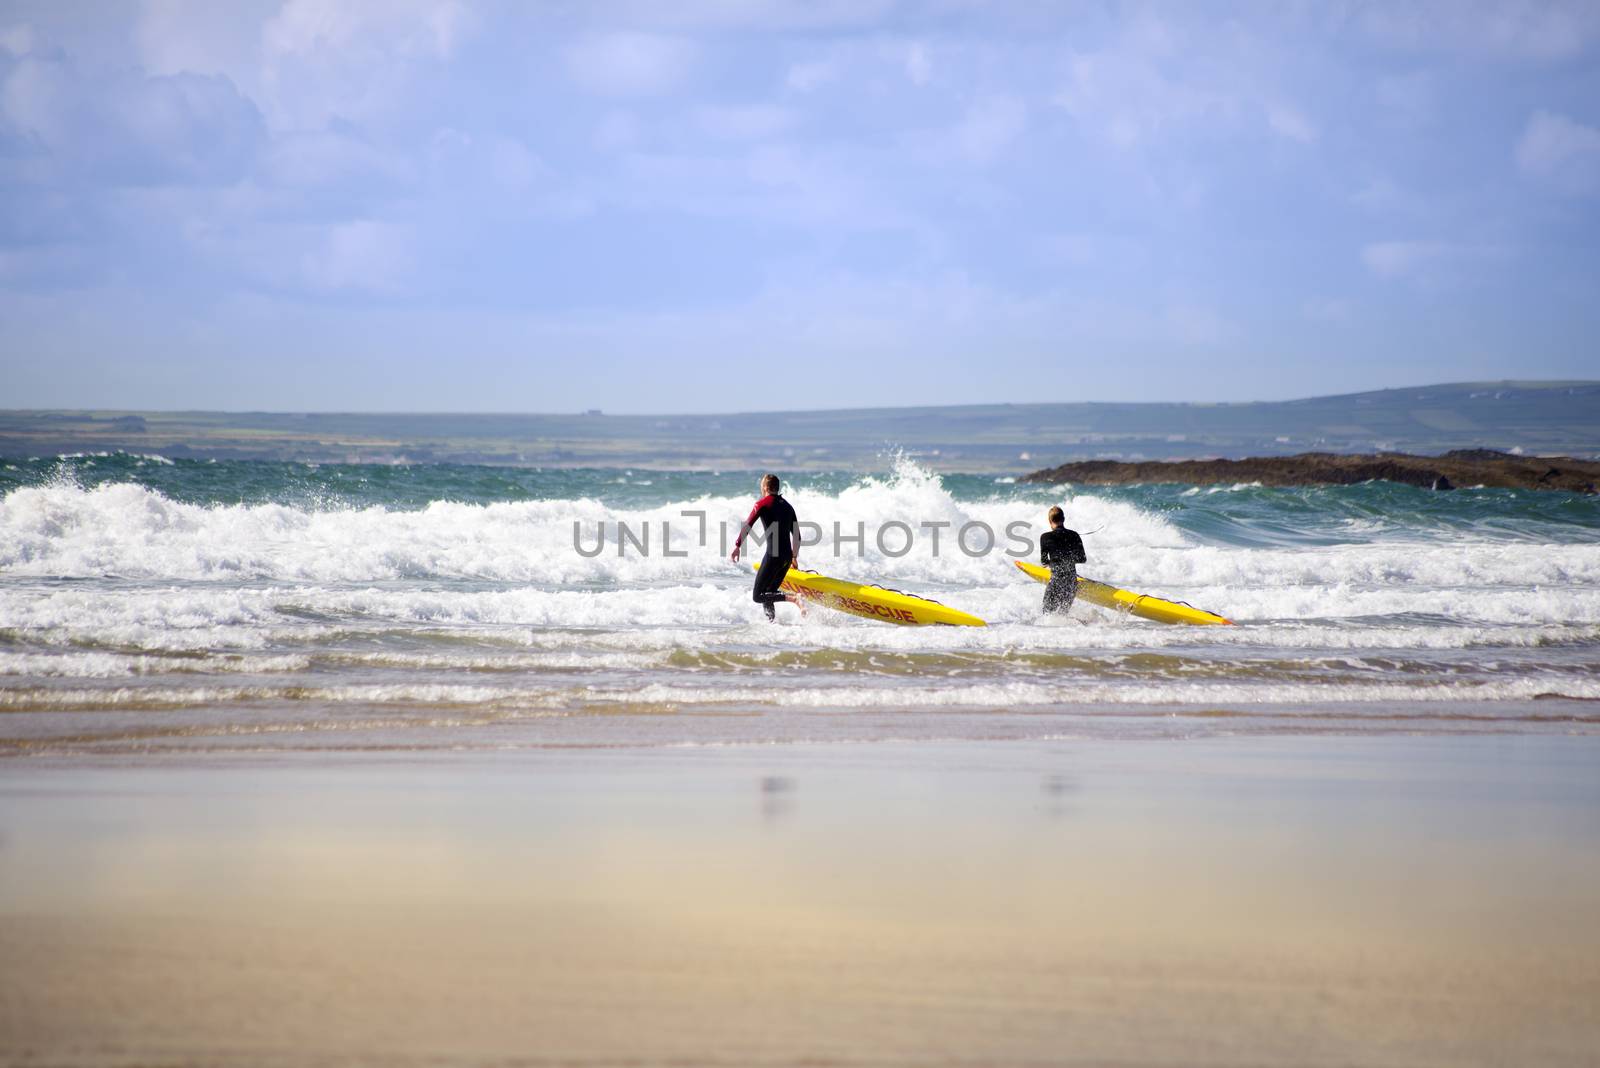 lifeguards training in the surf by morrbyte